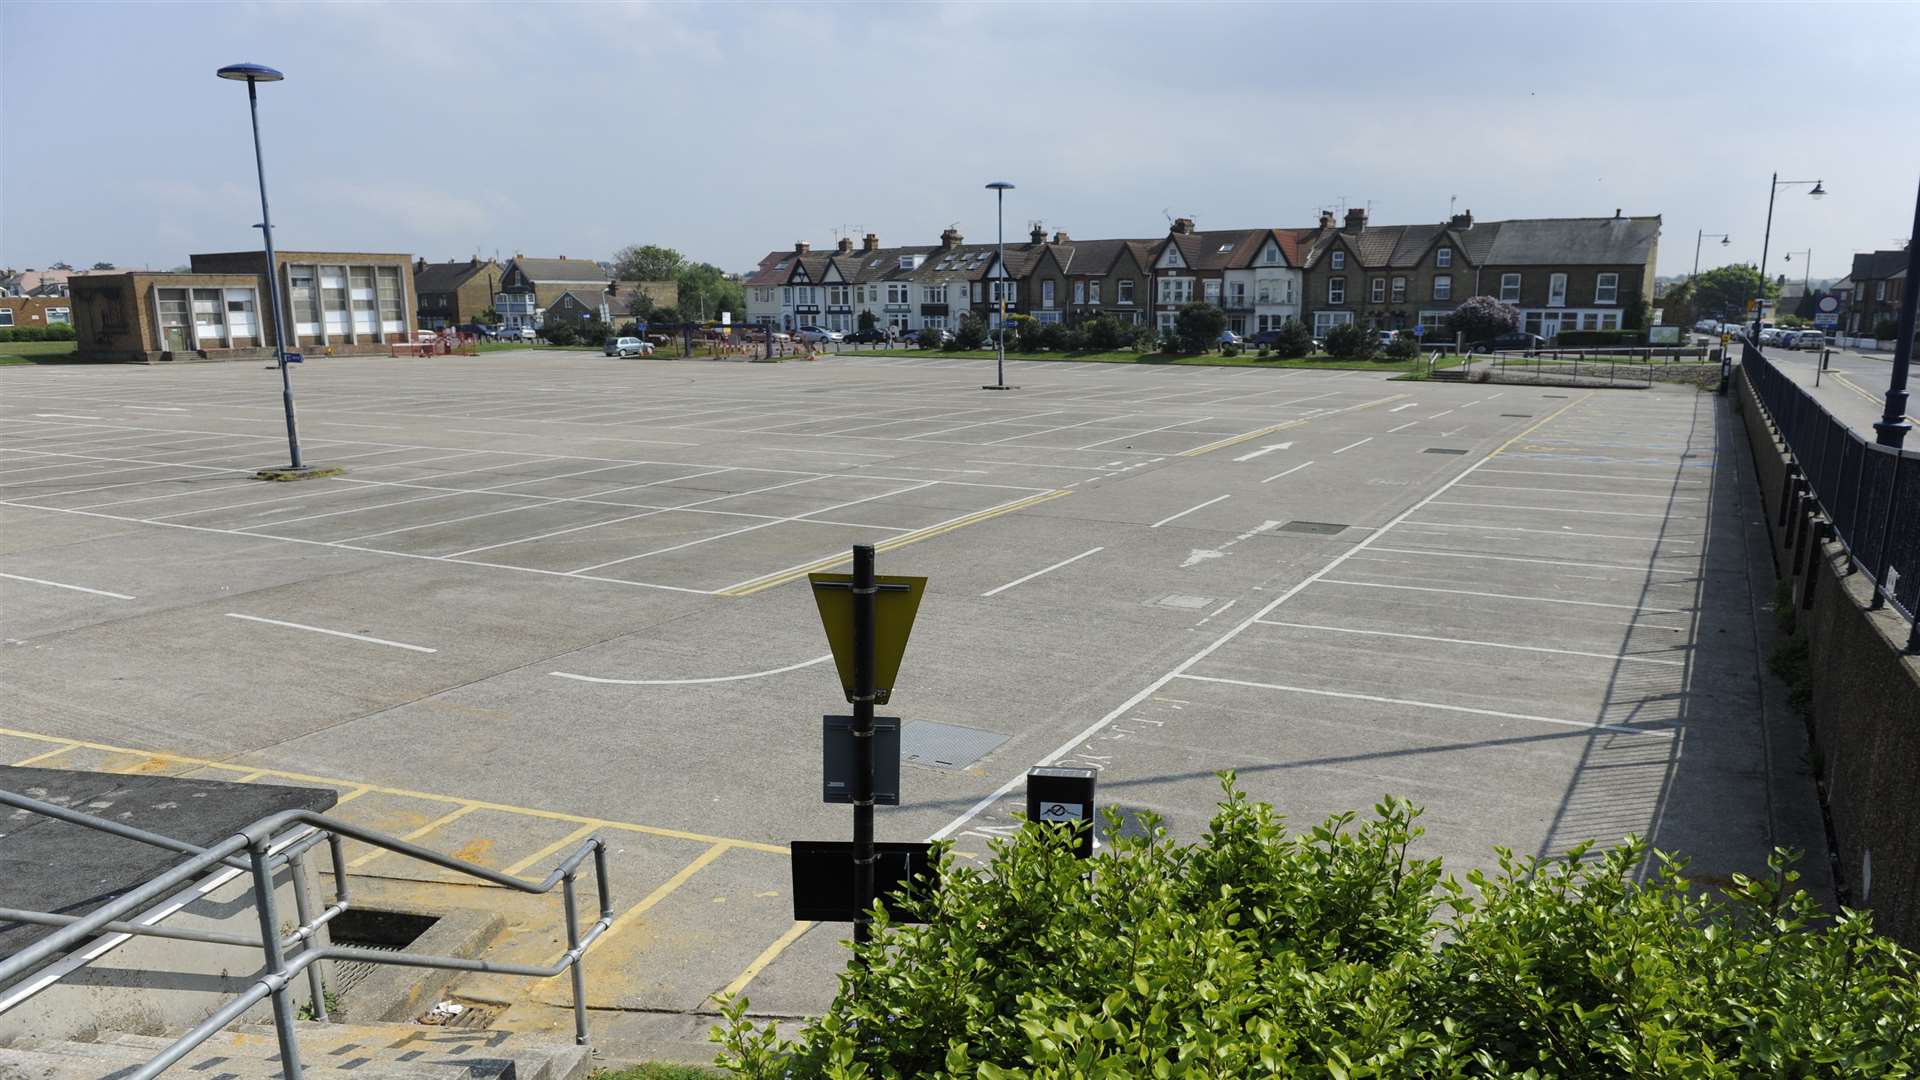 Gorrell Tank car park in Whitstable will become ticketless